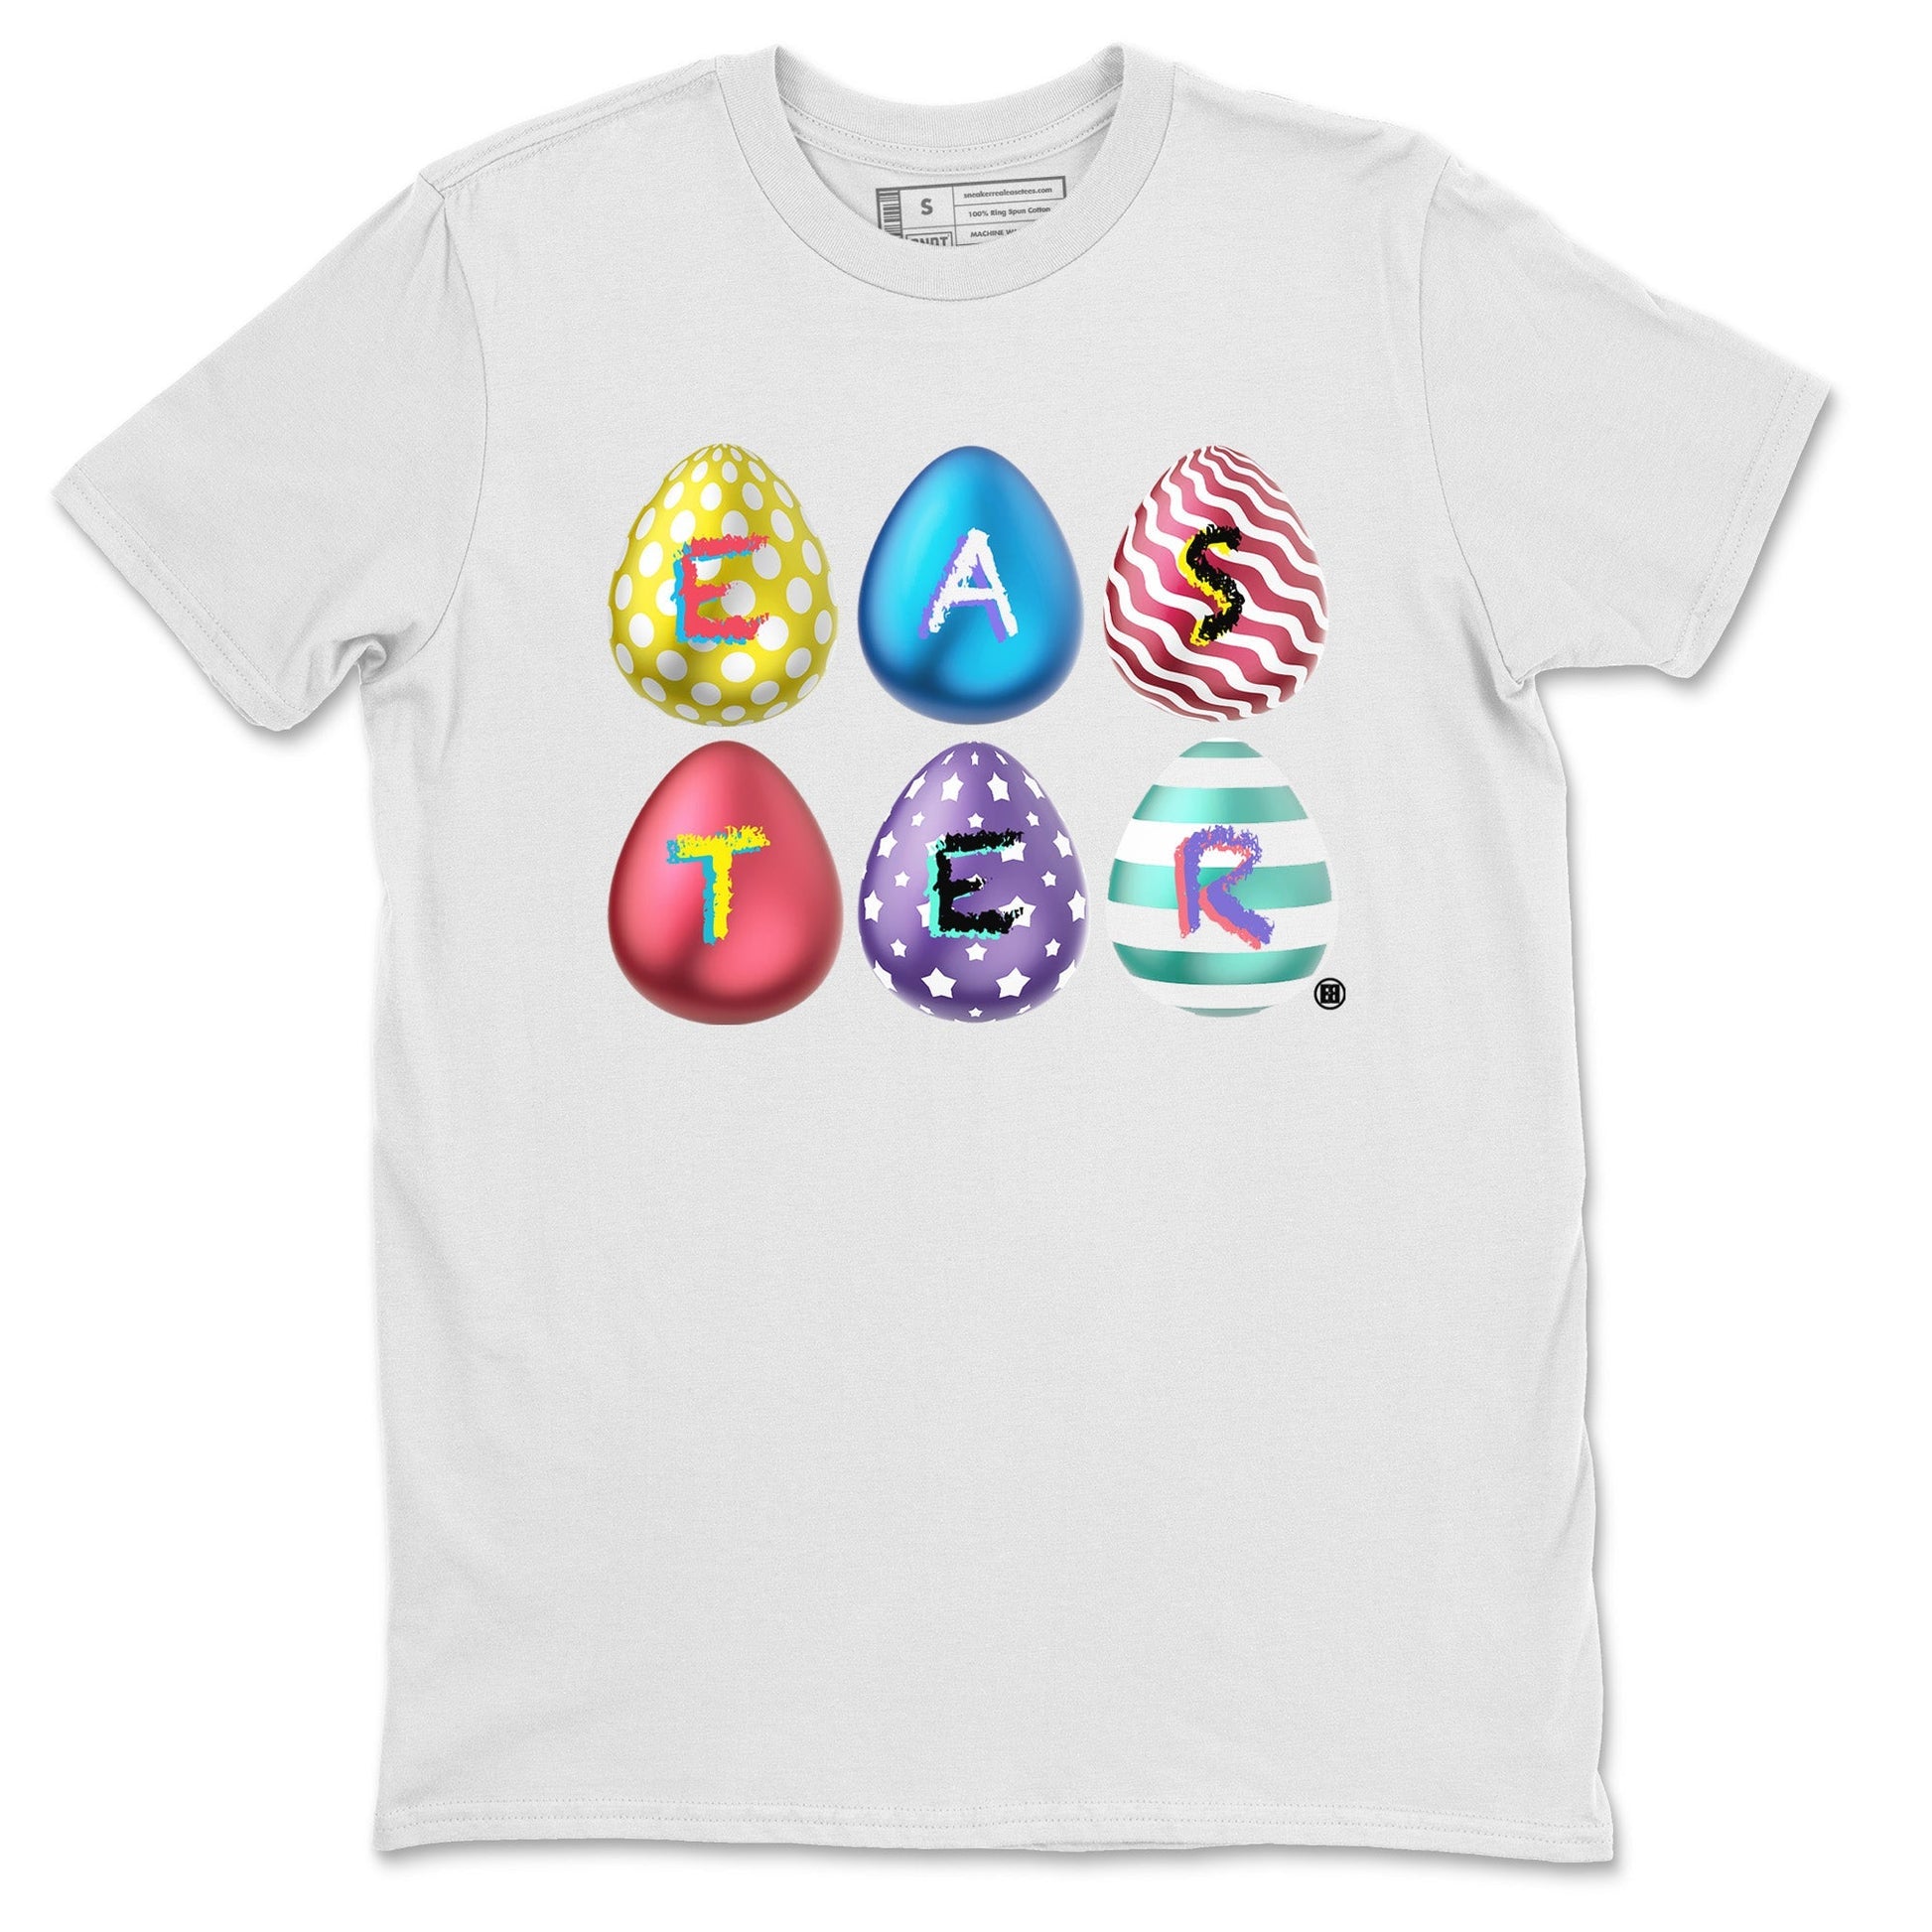 Dunk Easter Candy Sneaker Tees Drip Gear Zone Colorful Easter Sneaker Tees Holiday Easter T-Shirt Shirt Unisex Shirts White 2